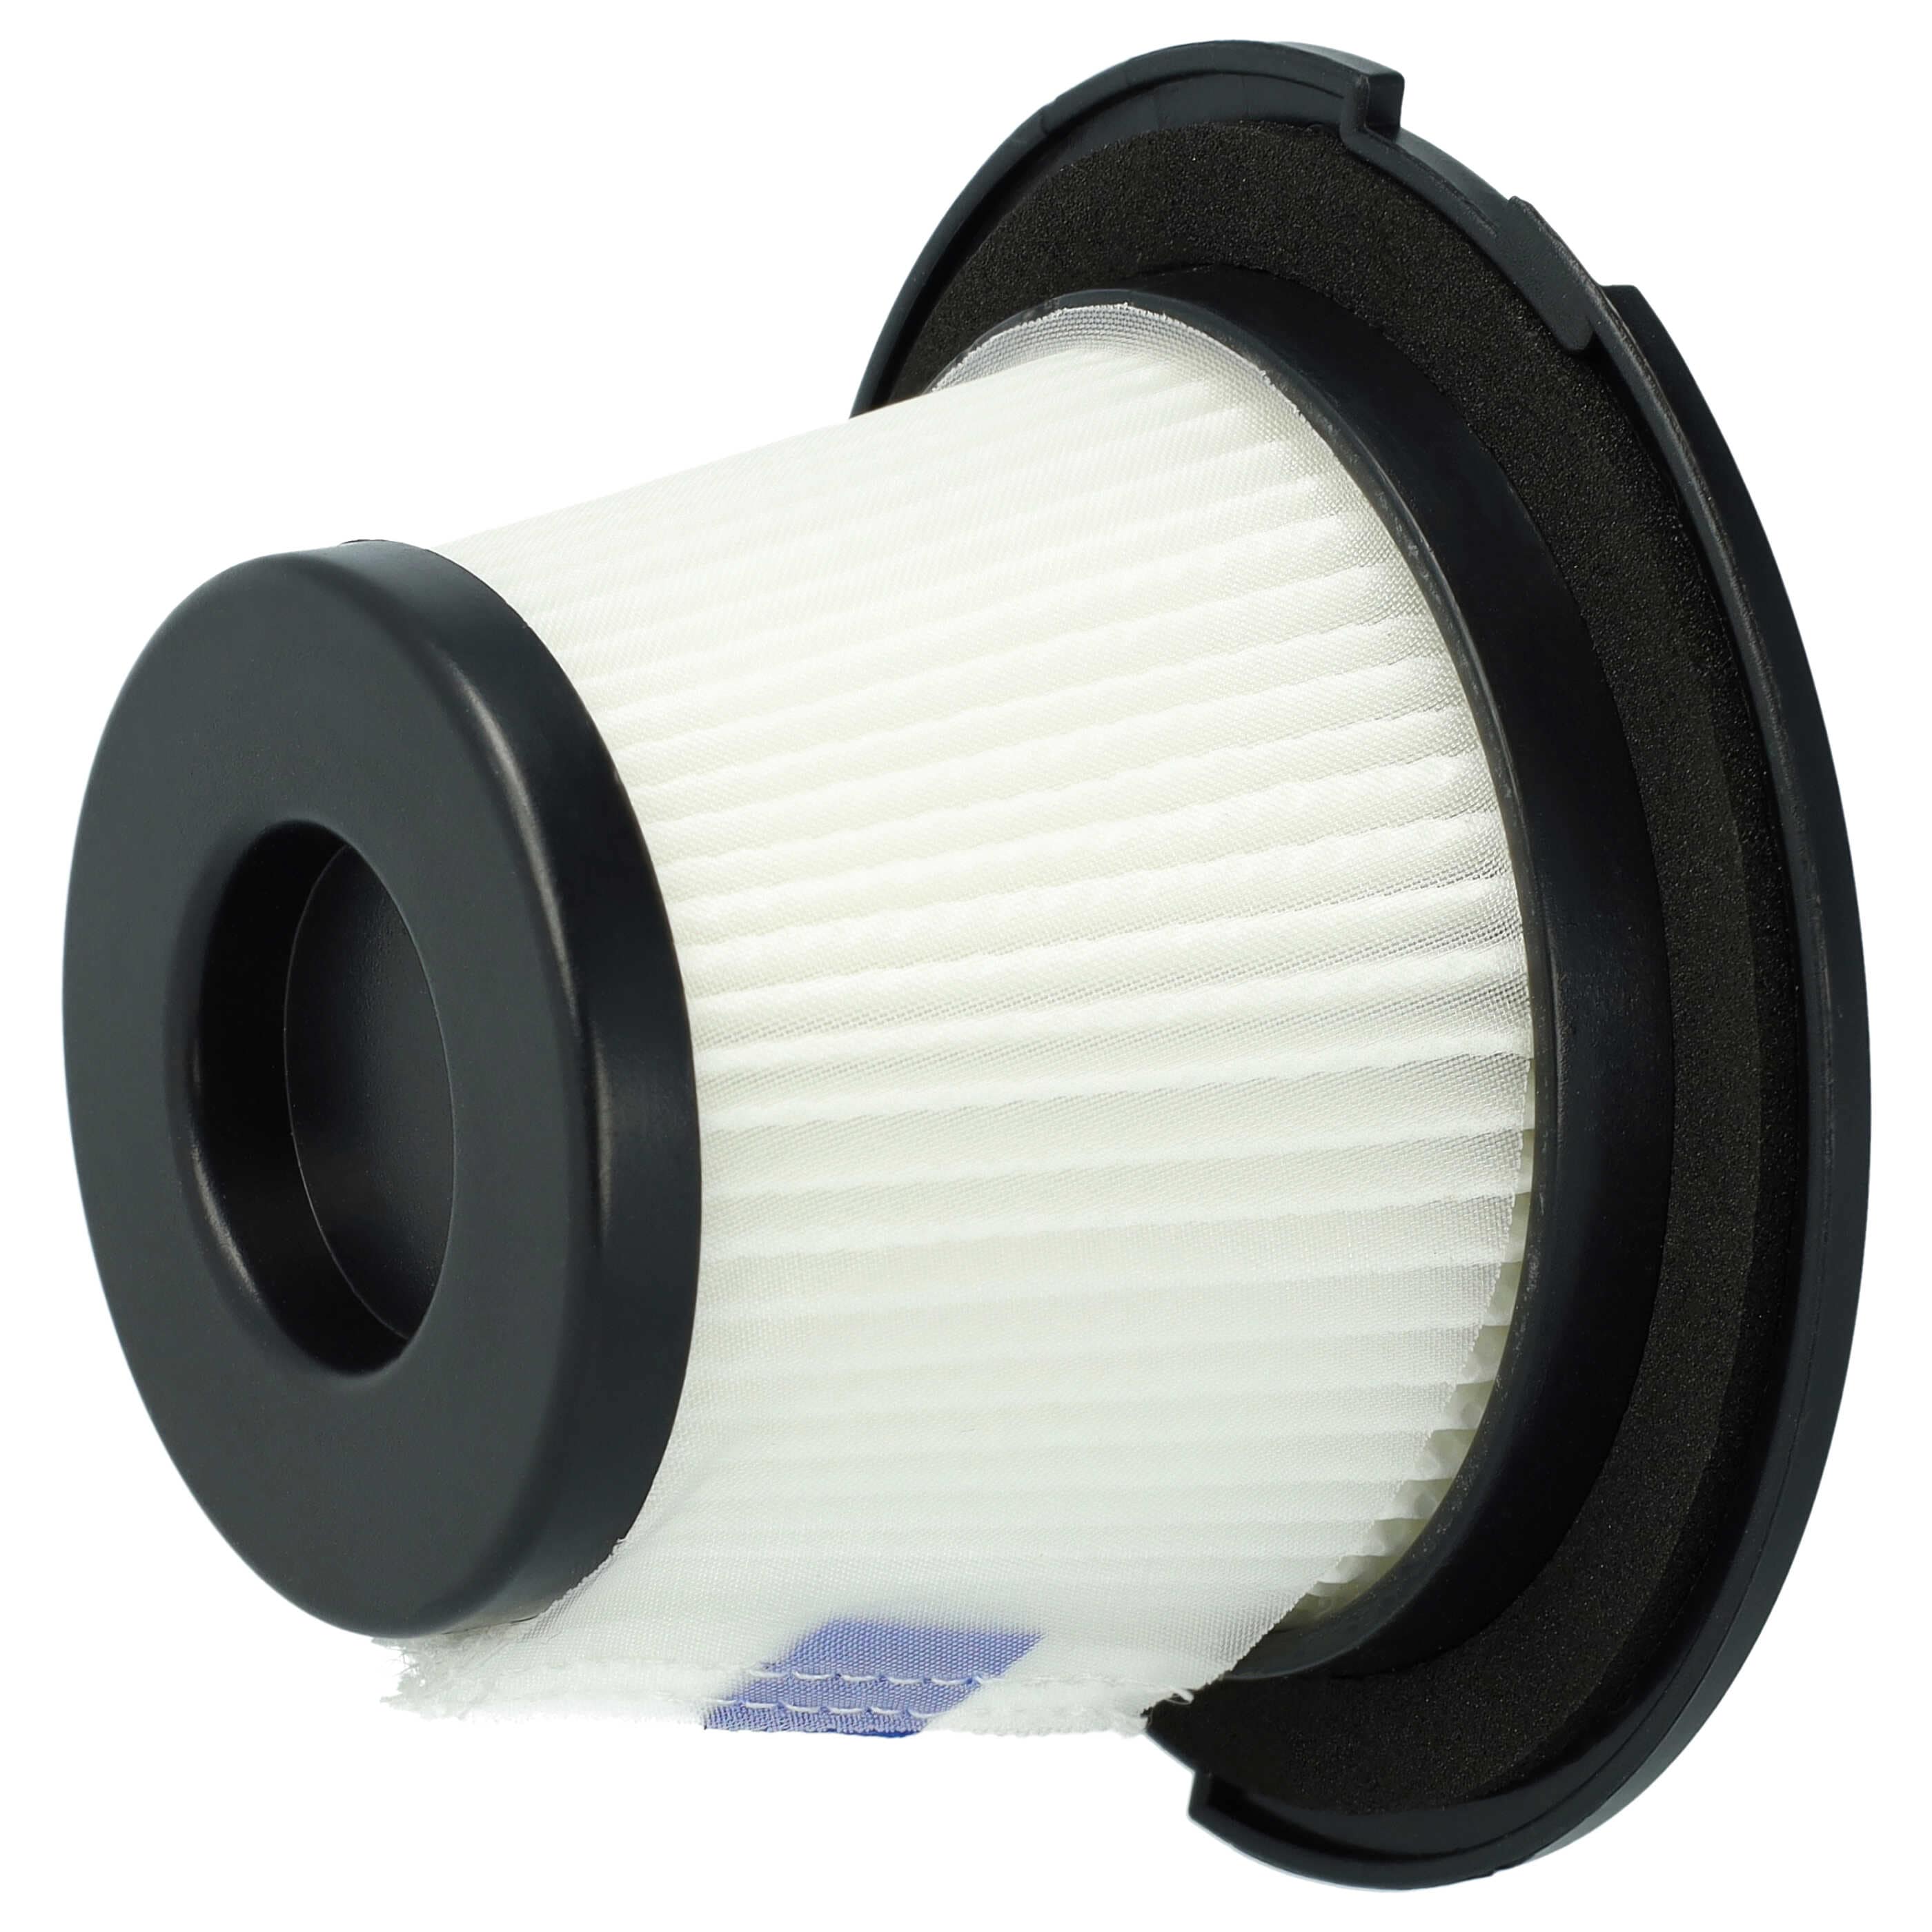 1x filter suitable for Clean Butler 4G Silent 10033762, Clean Butler 4G Silent 10033763, K17, UVC-122311.3 Kla